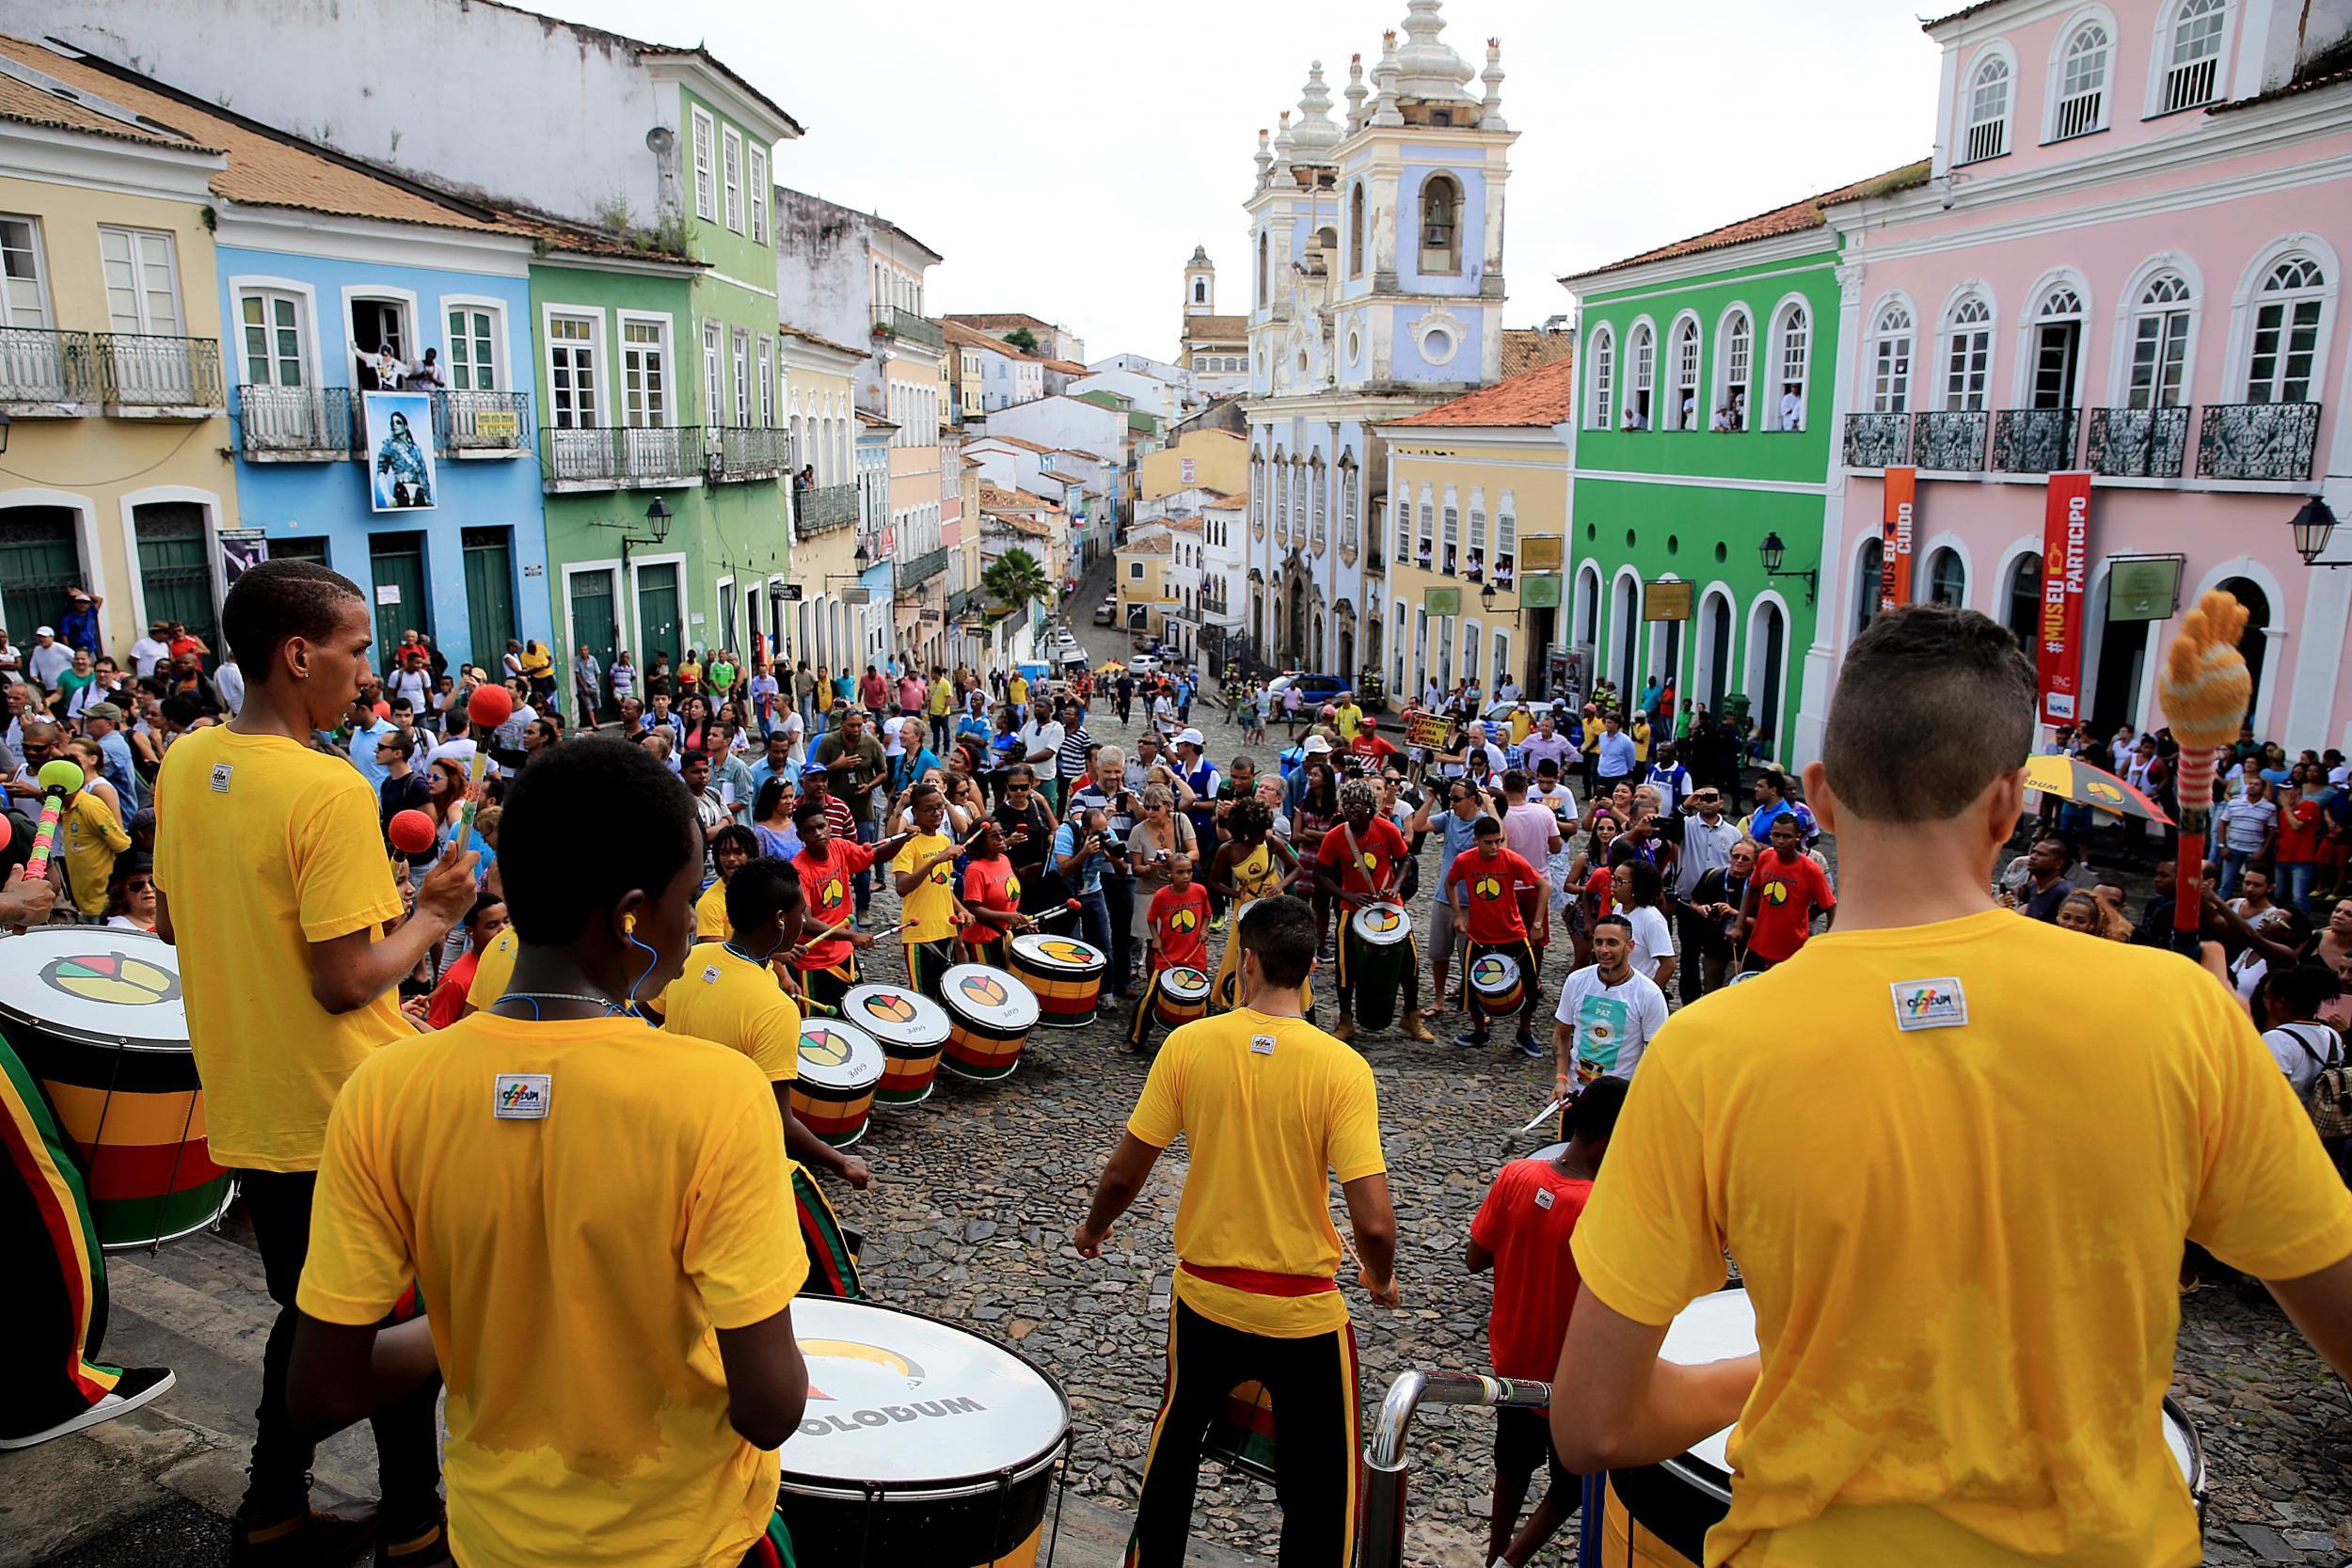 Drumming troupes fill Salvador's historic centre, Pelourinho, which arguably has an even greater carnival atmosphere than Rio